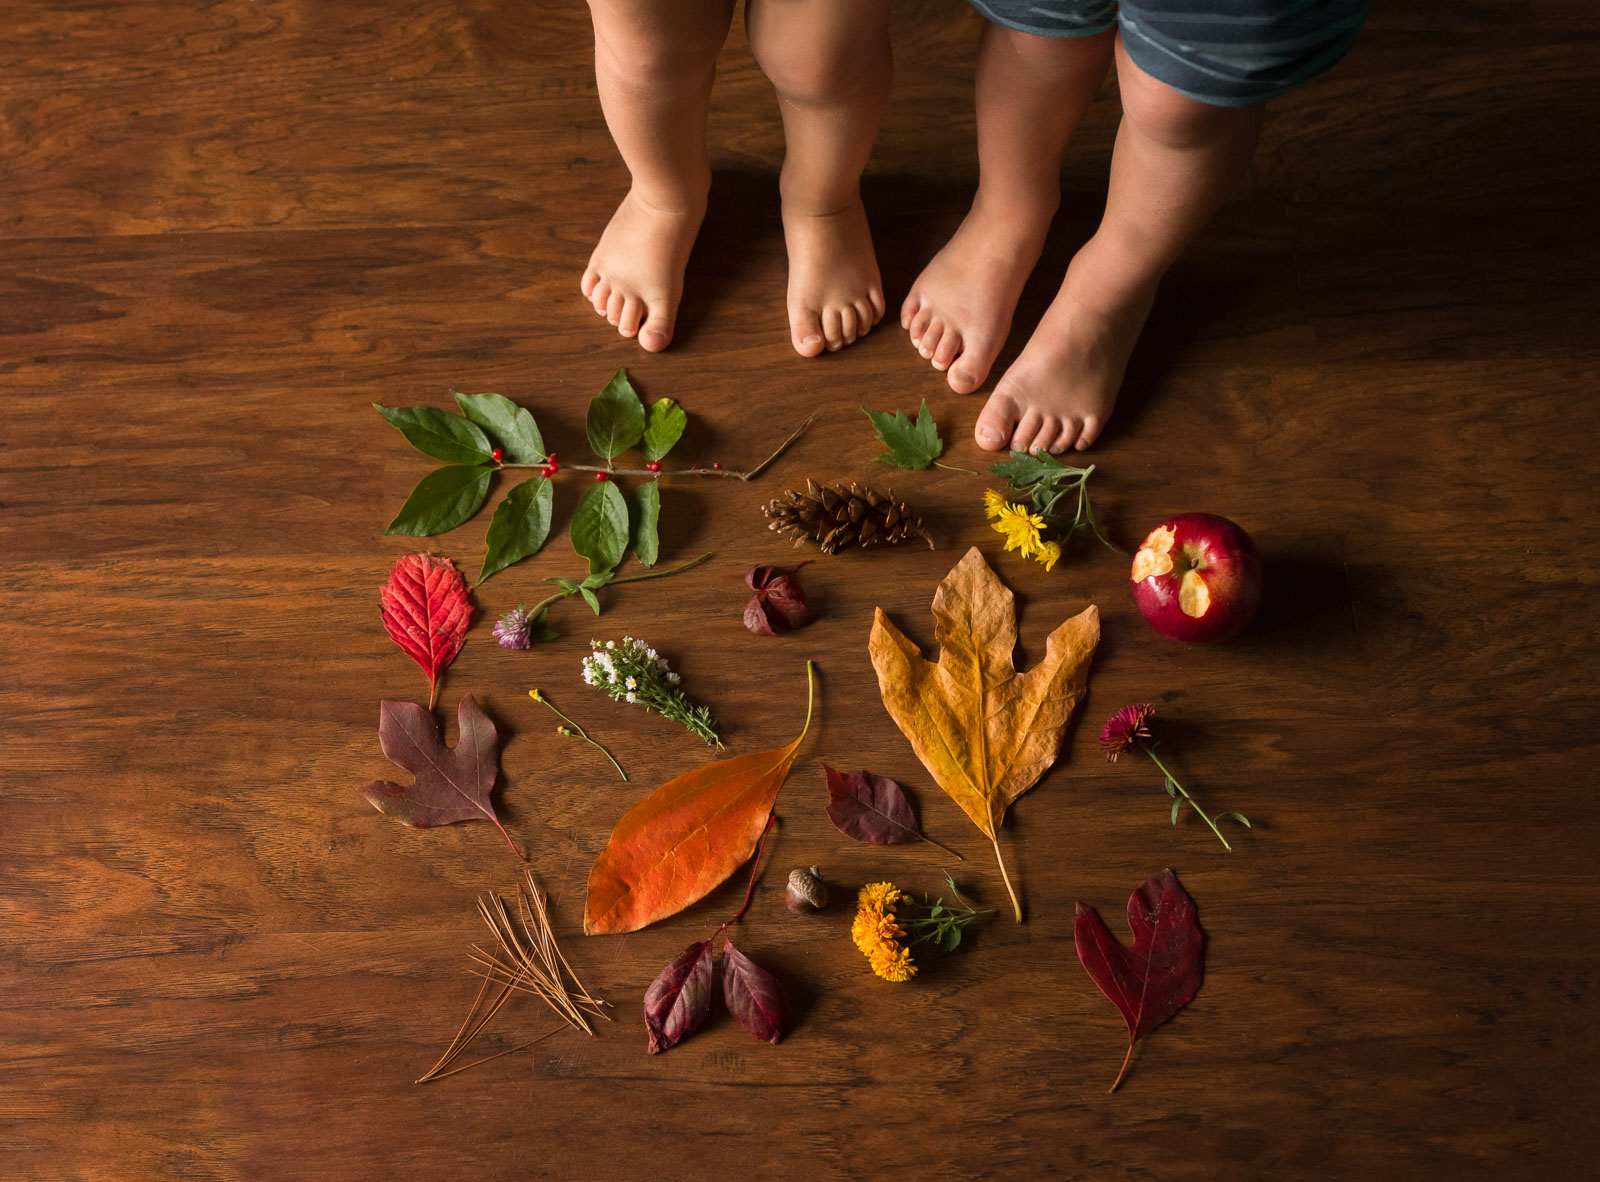 picture of kids feet and their nature treasures by Danielle Awwad